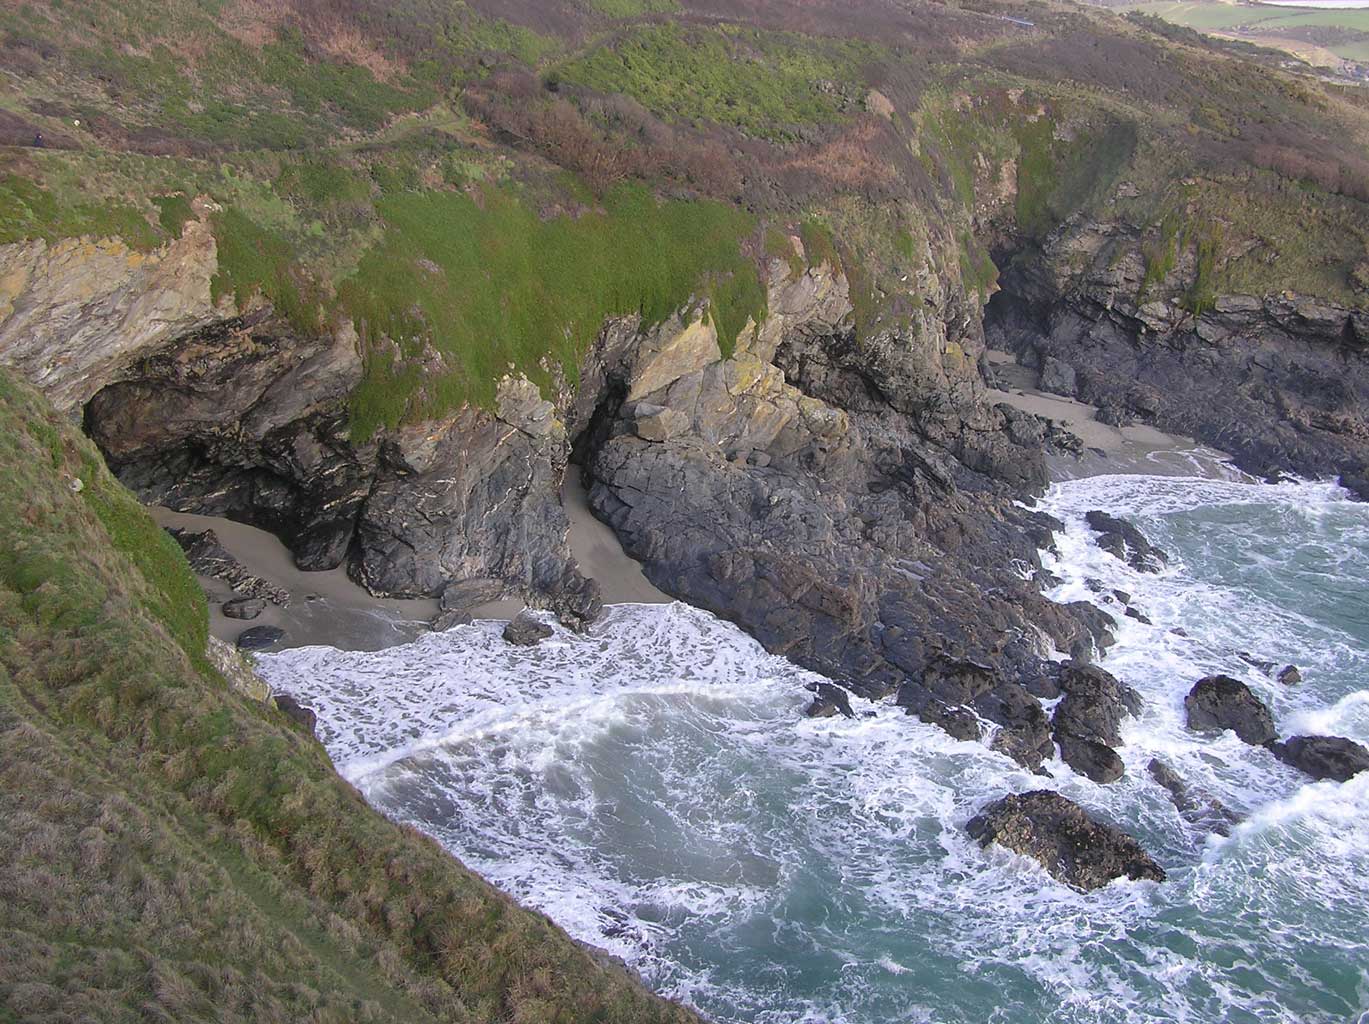 Prussia Cove - Piskie's Cove and caves at half tide